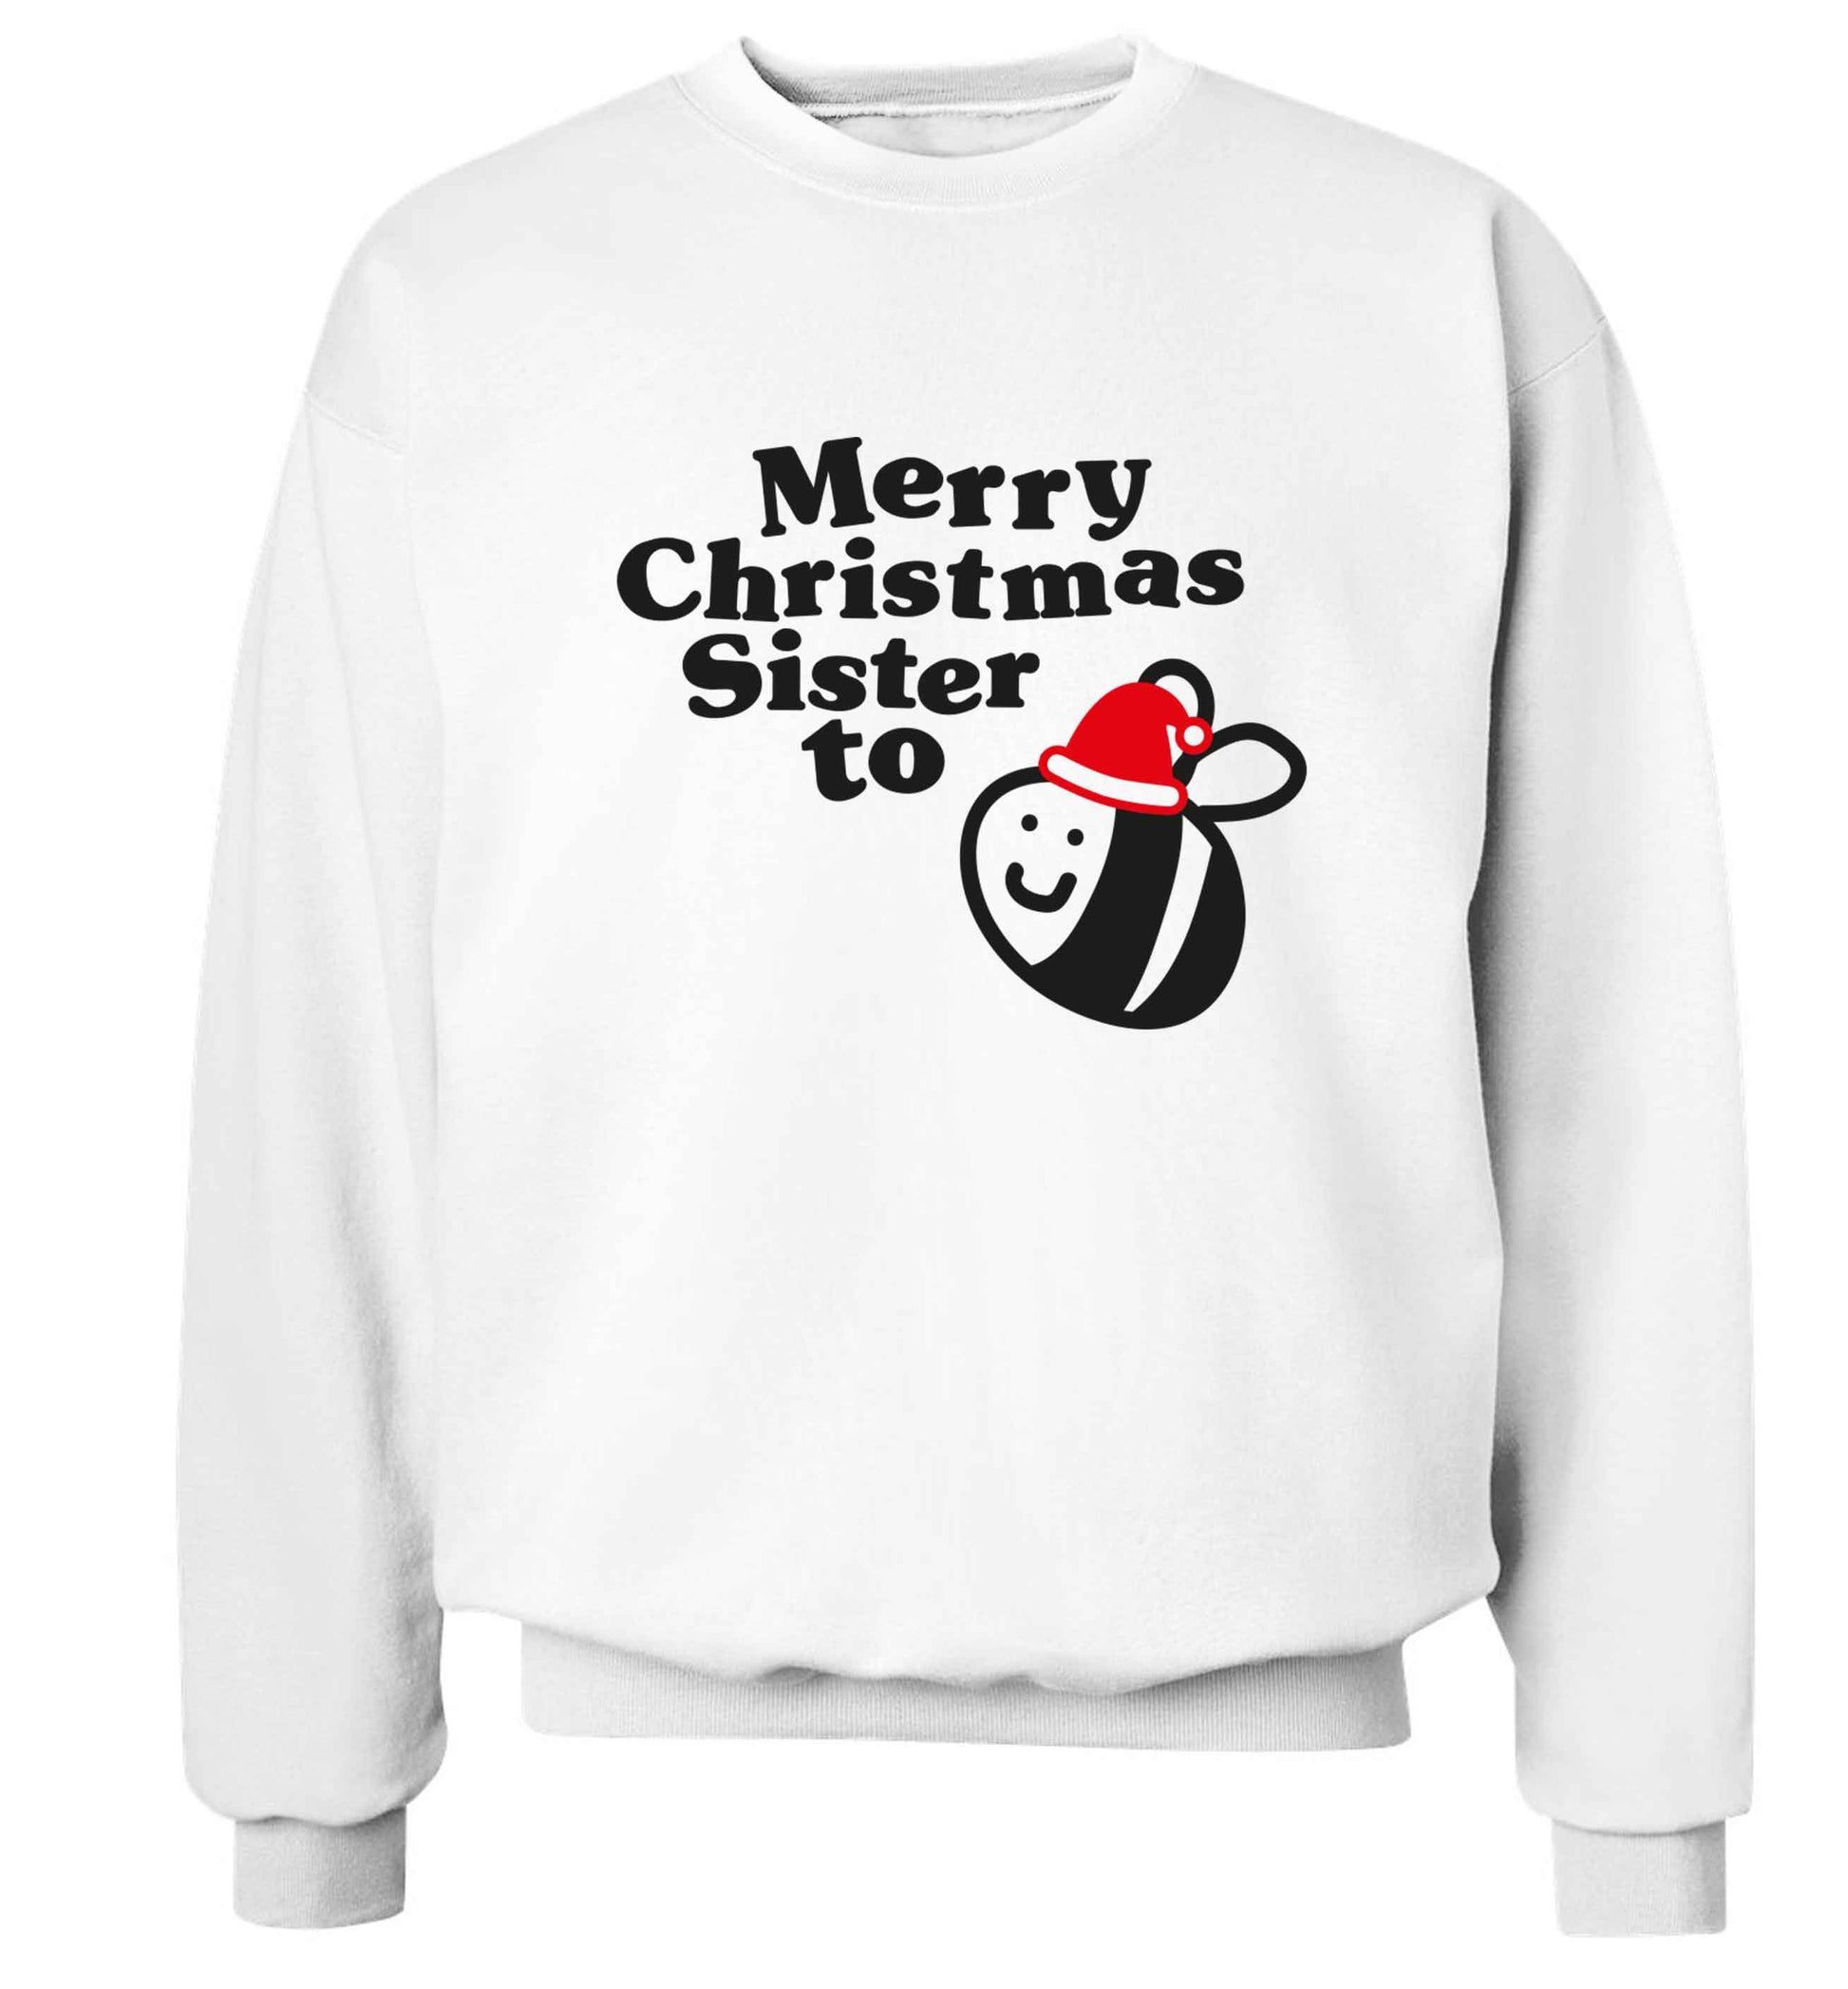 Merry Christmas sister to be Adult's unisex white Sweater 2XL